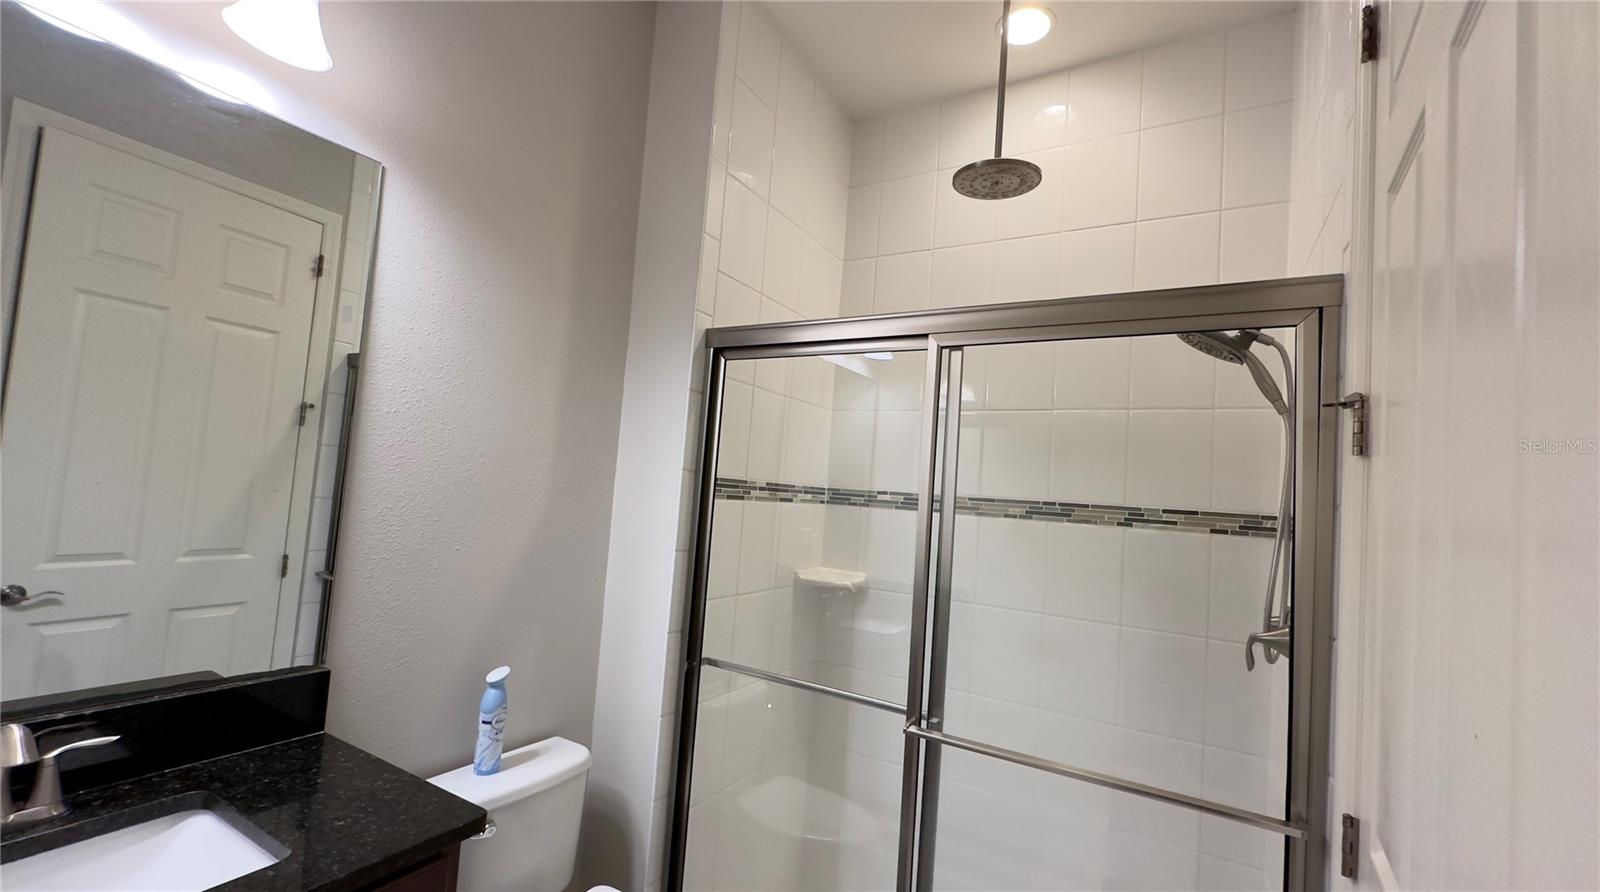 … and a walk-in shower with a combo rain showerhead and handheld shower